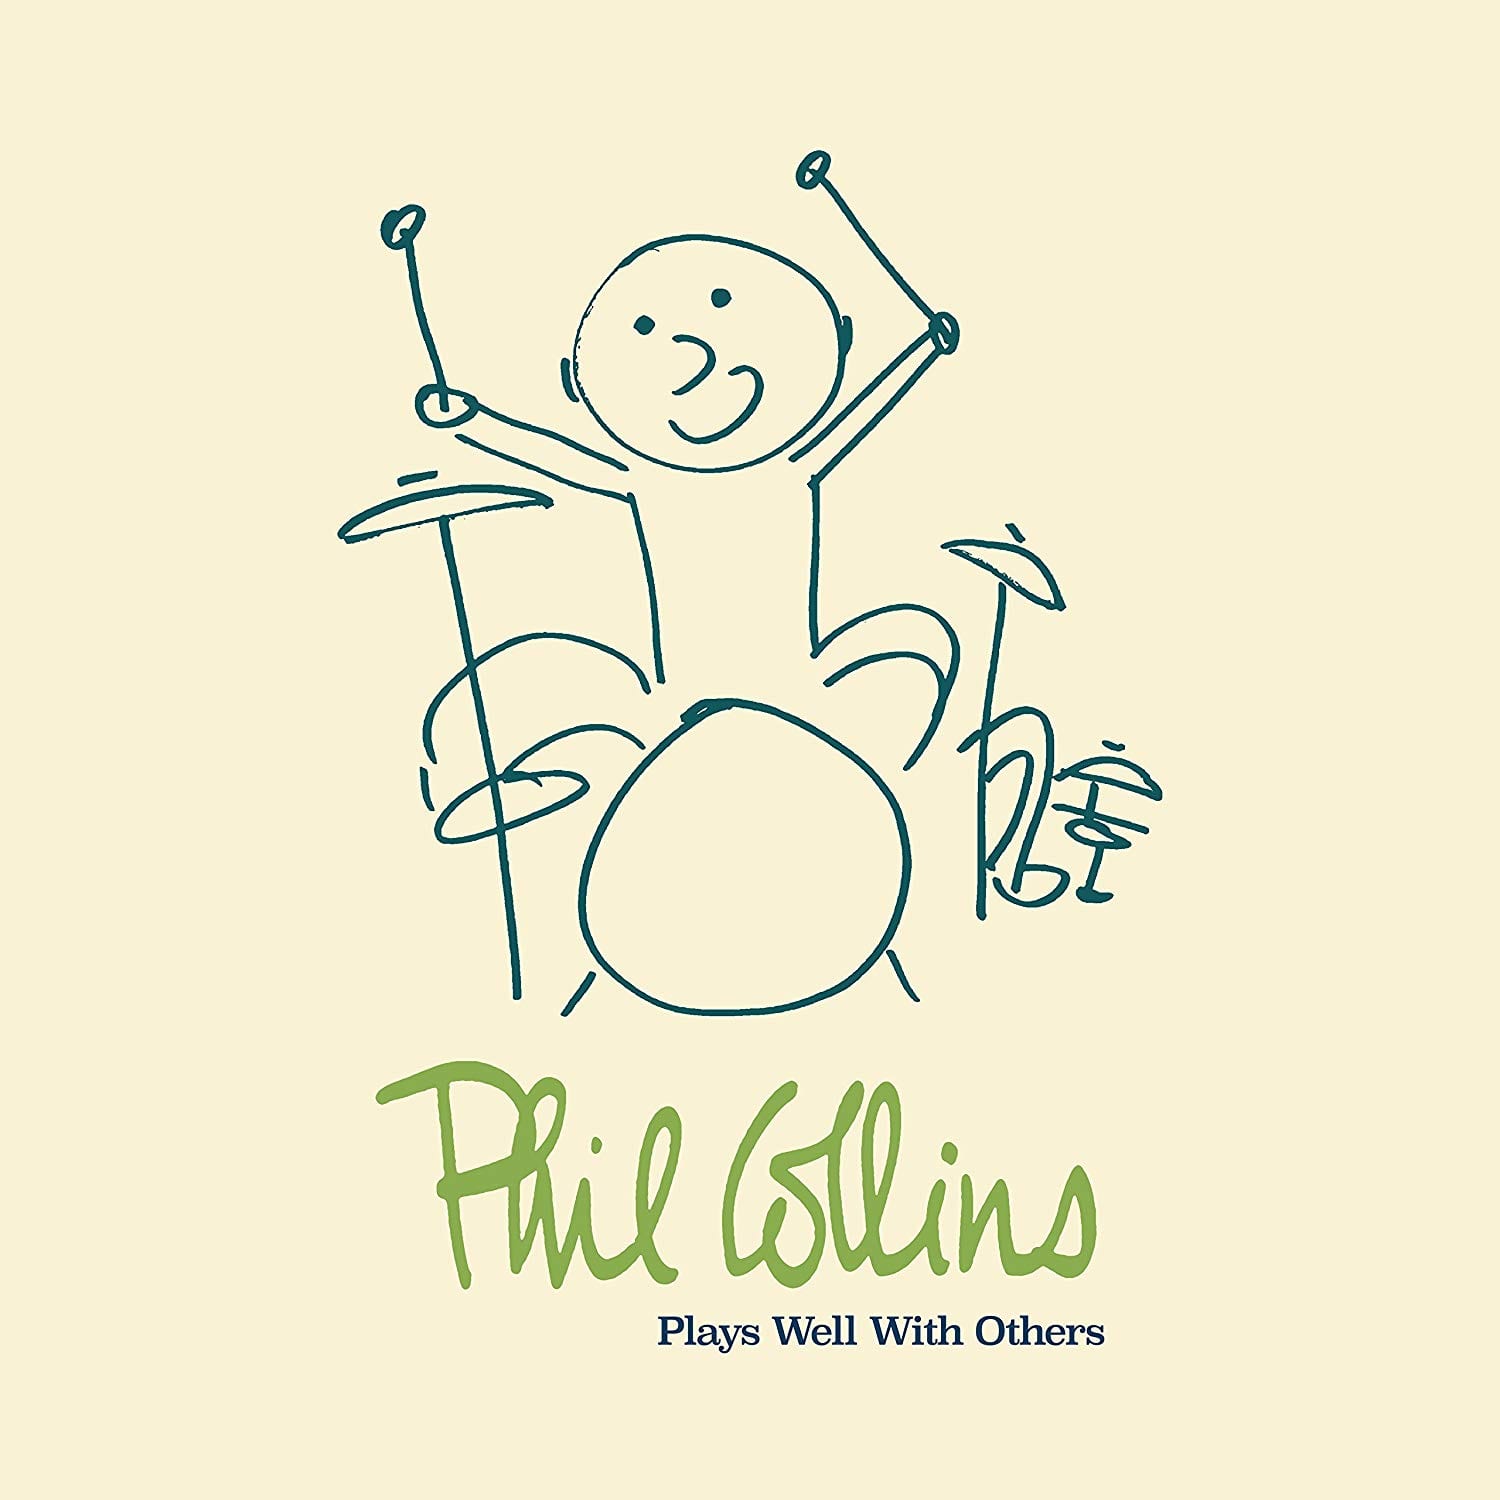 PHIL COLLINS – Playing well with others